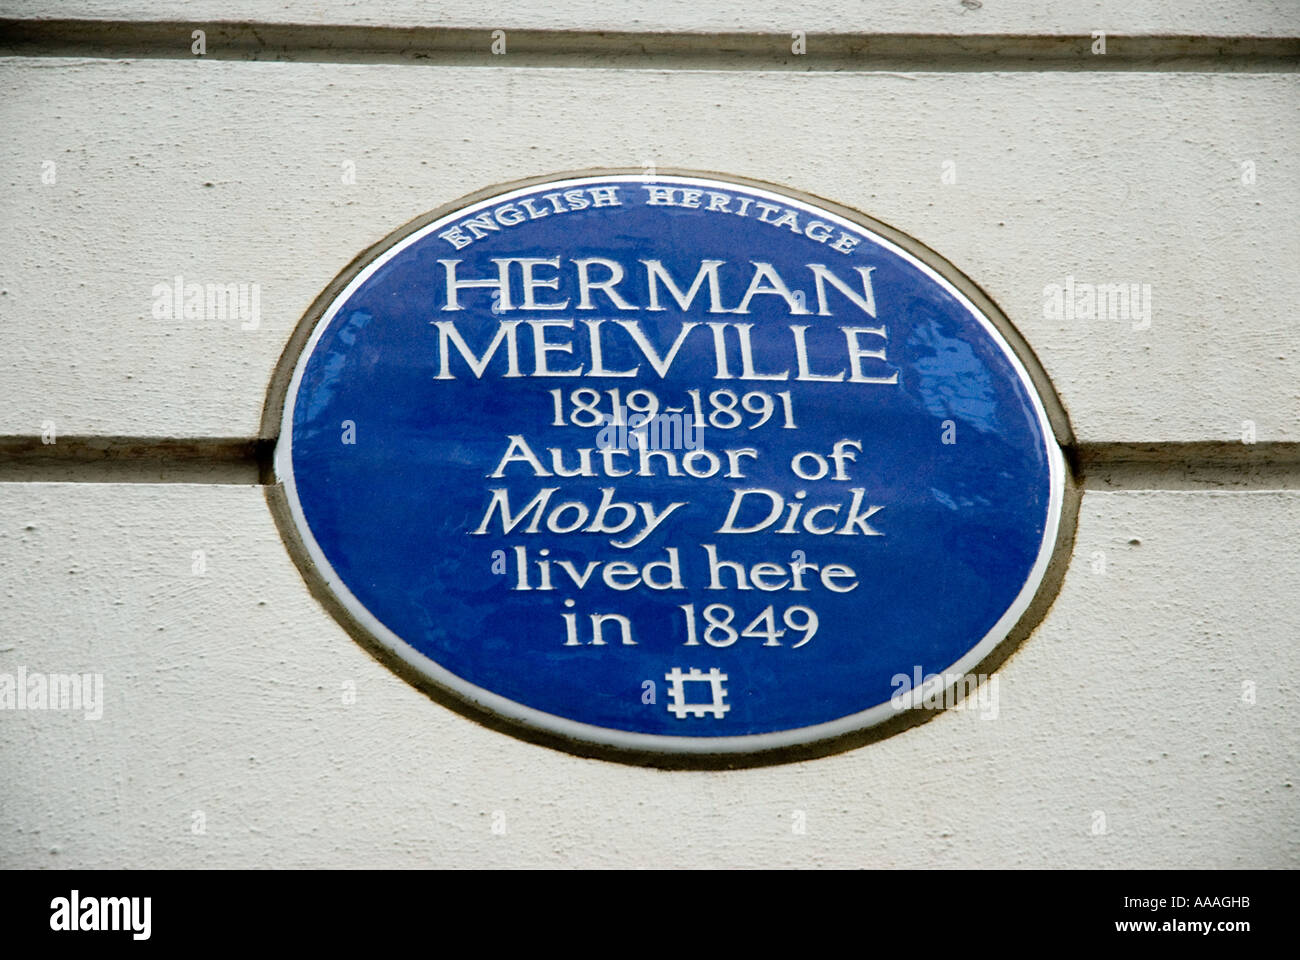 Herman Melville author lived here in Craven street placard London England Stock Photo